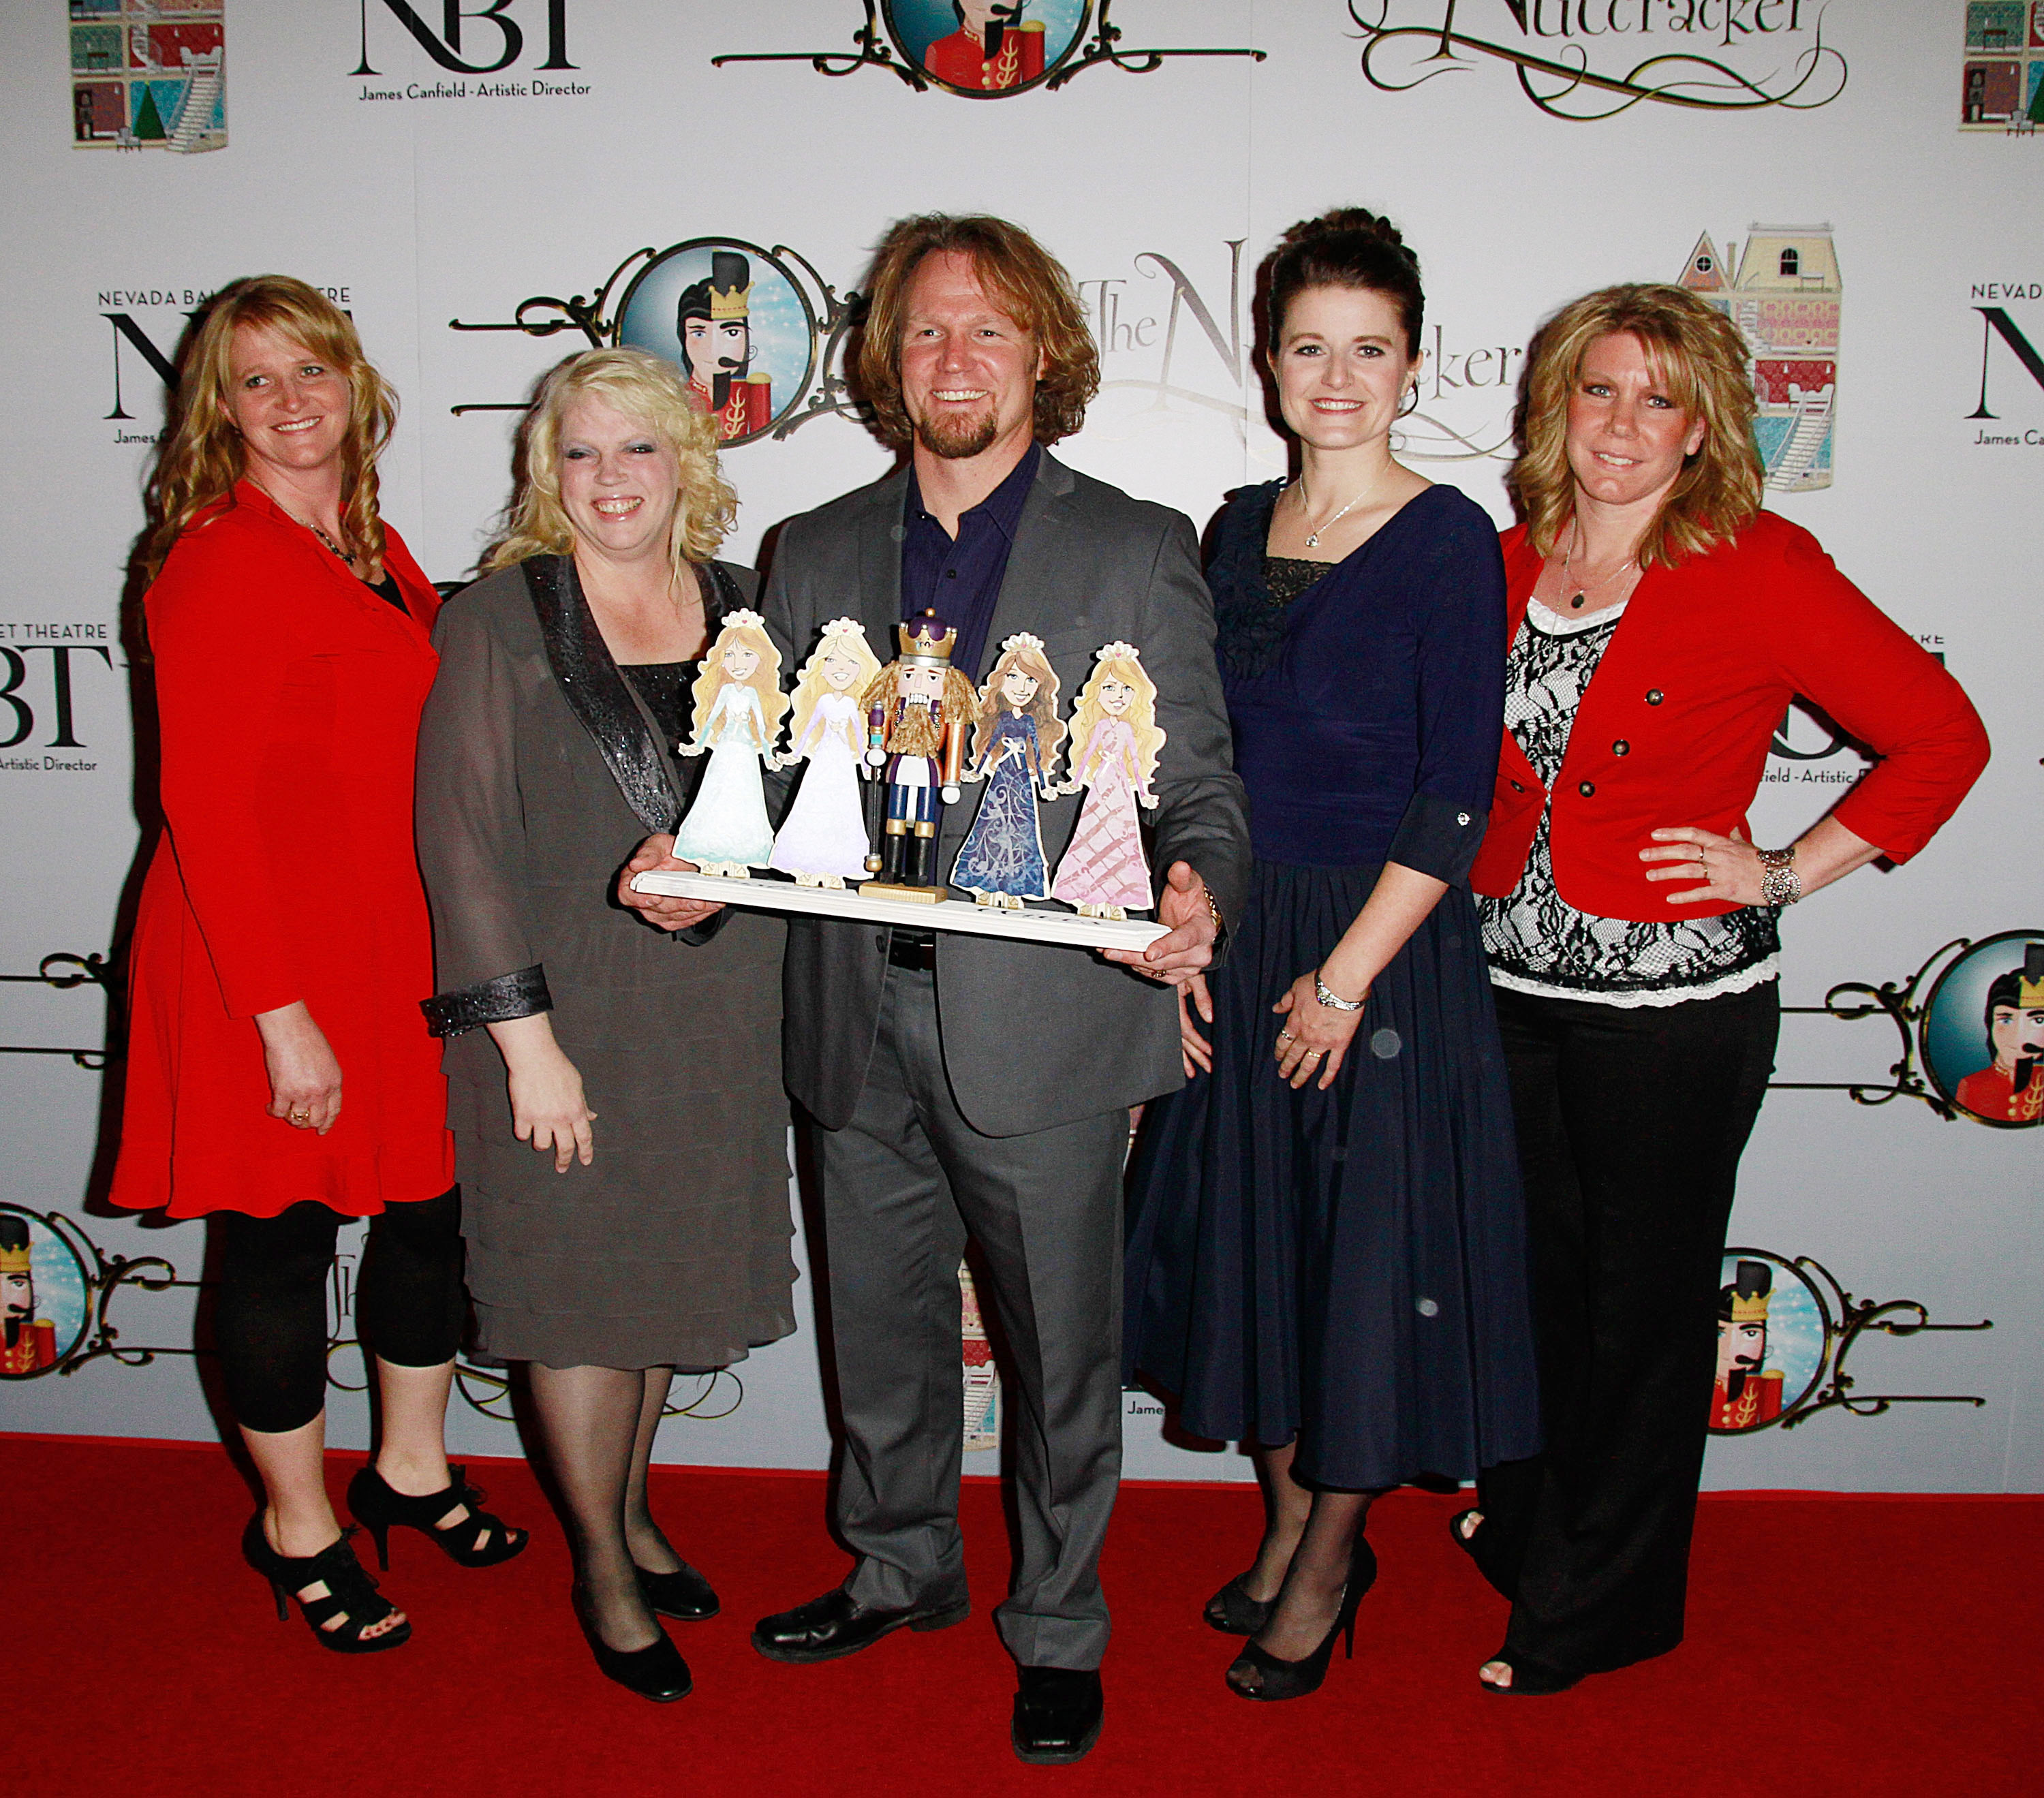 Christine Brown, Janelle Brown, Kody Brown, Robyn Brown and Meri Brown attend the Nevada Ballet Theatre's Production of 'The Nutcracker' in 2012